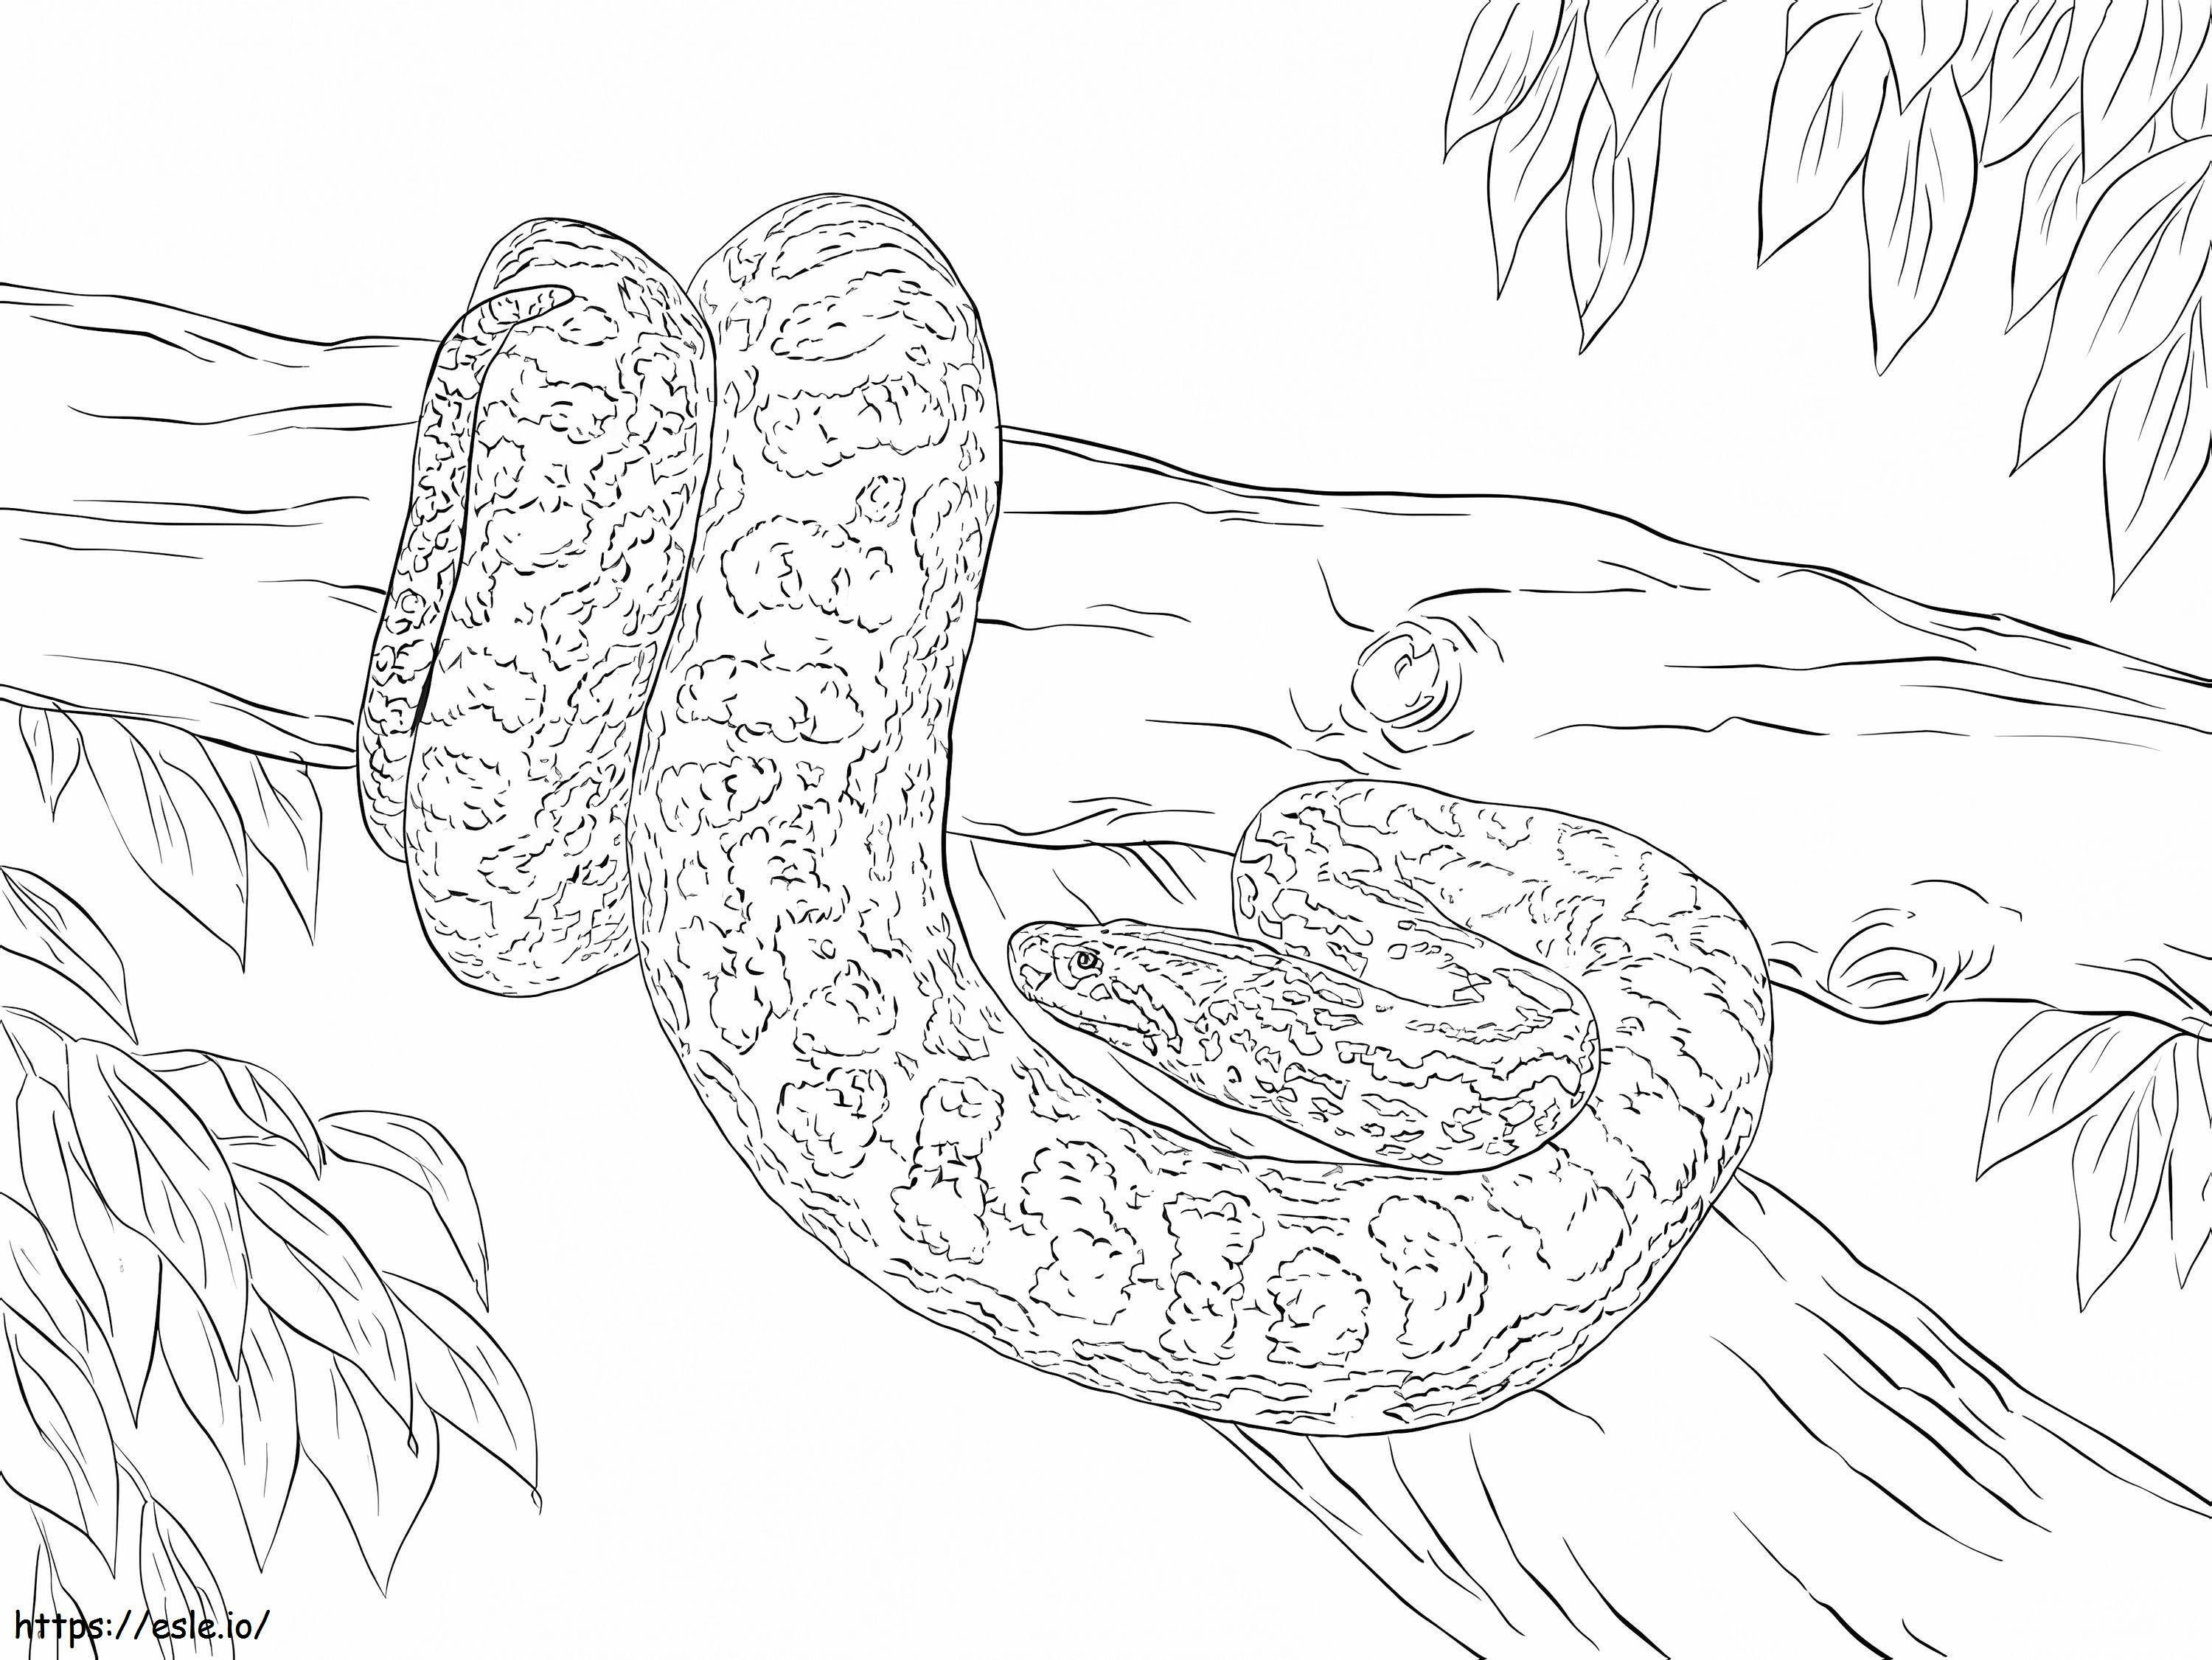 Yellow Anaconda On Branch coloring page